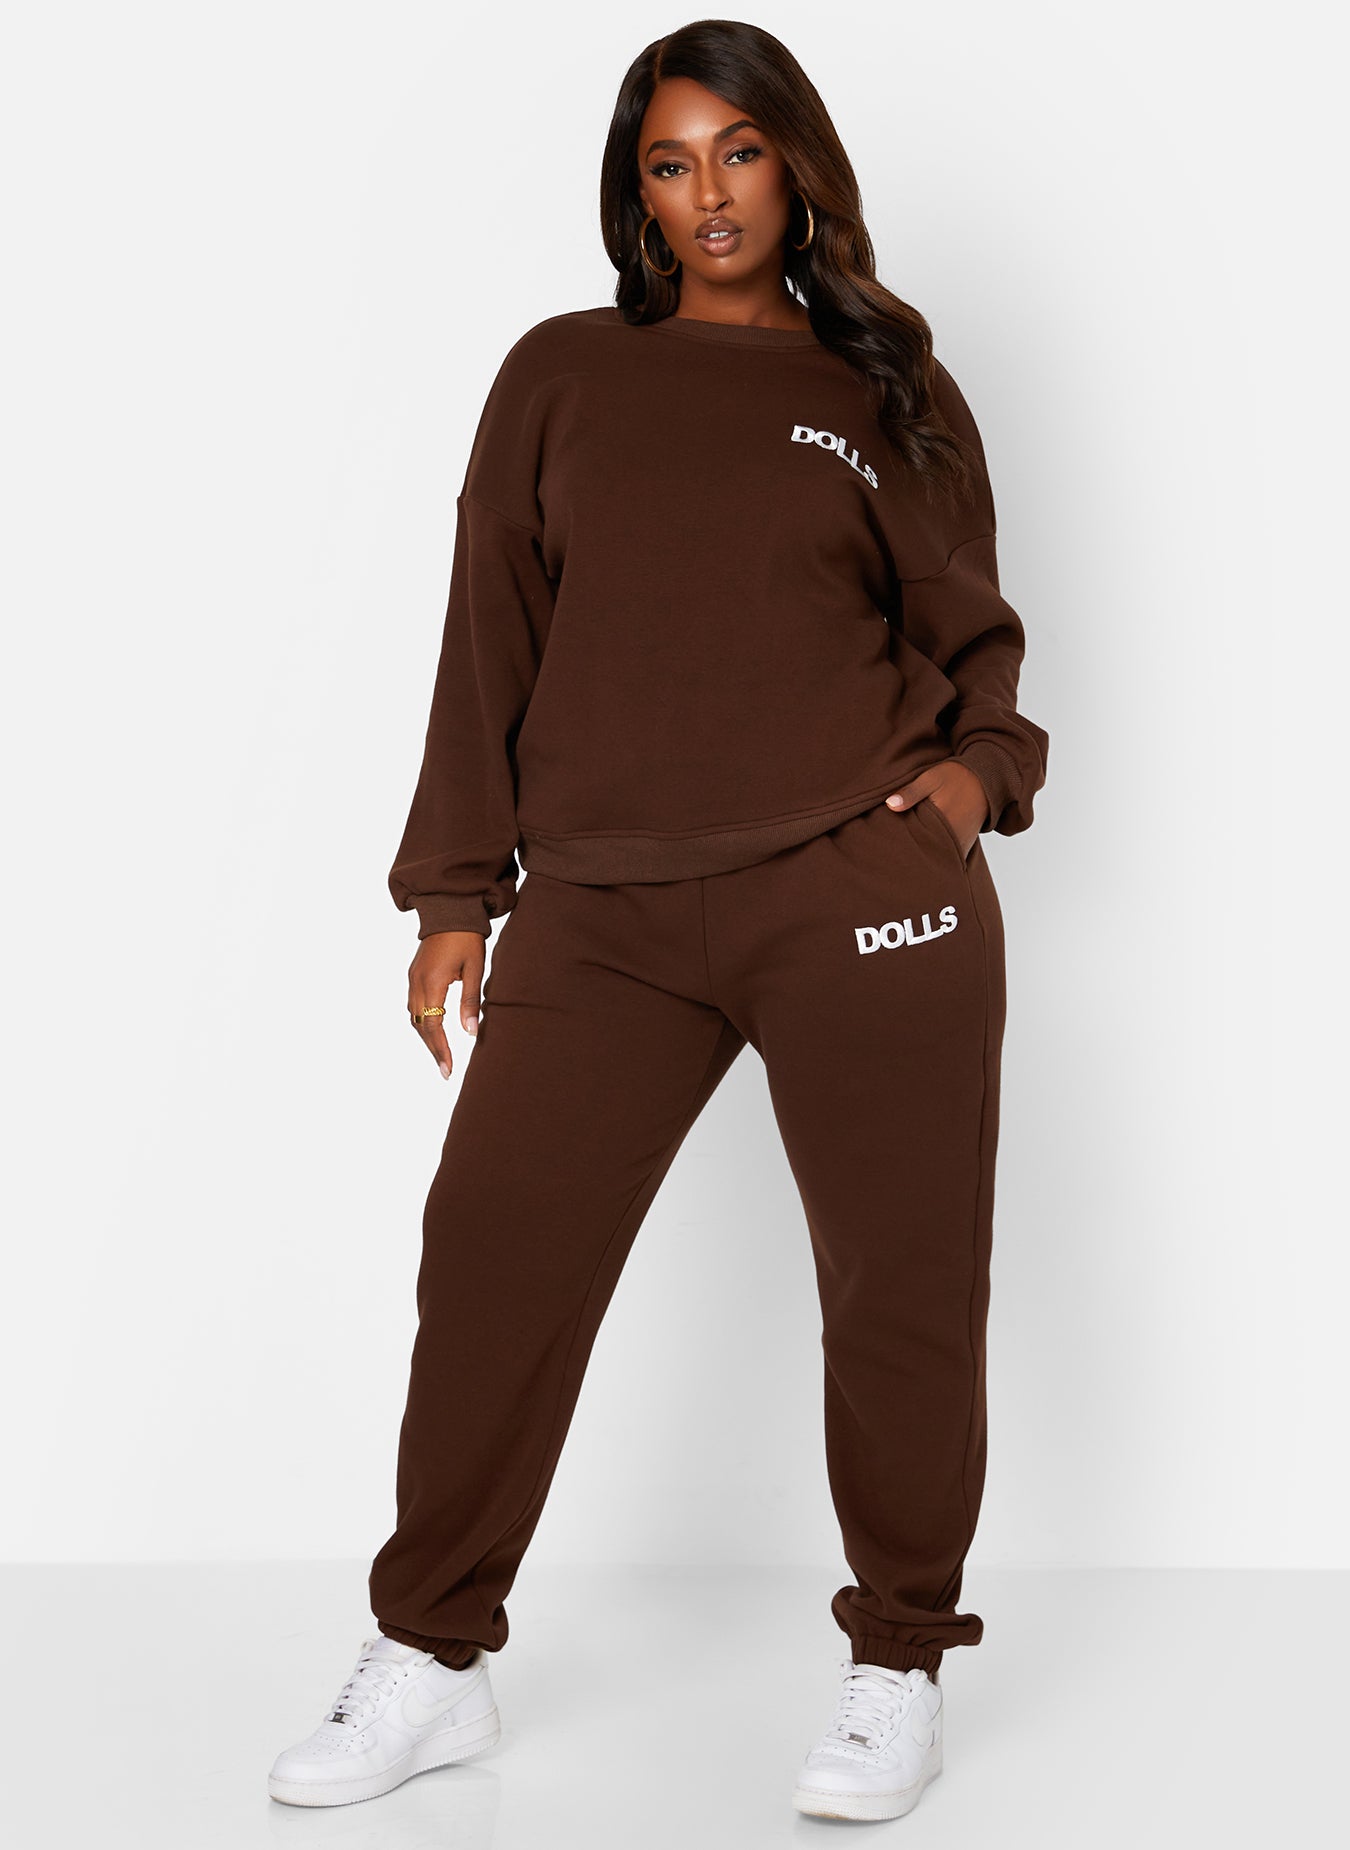 Brown On The Run Embroidered Drawstring Jogger Sweatpants W. Pockets Plus Sizes